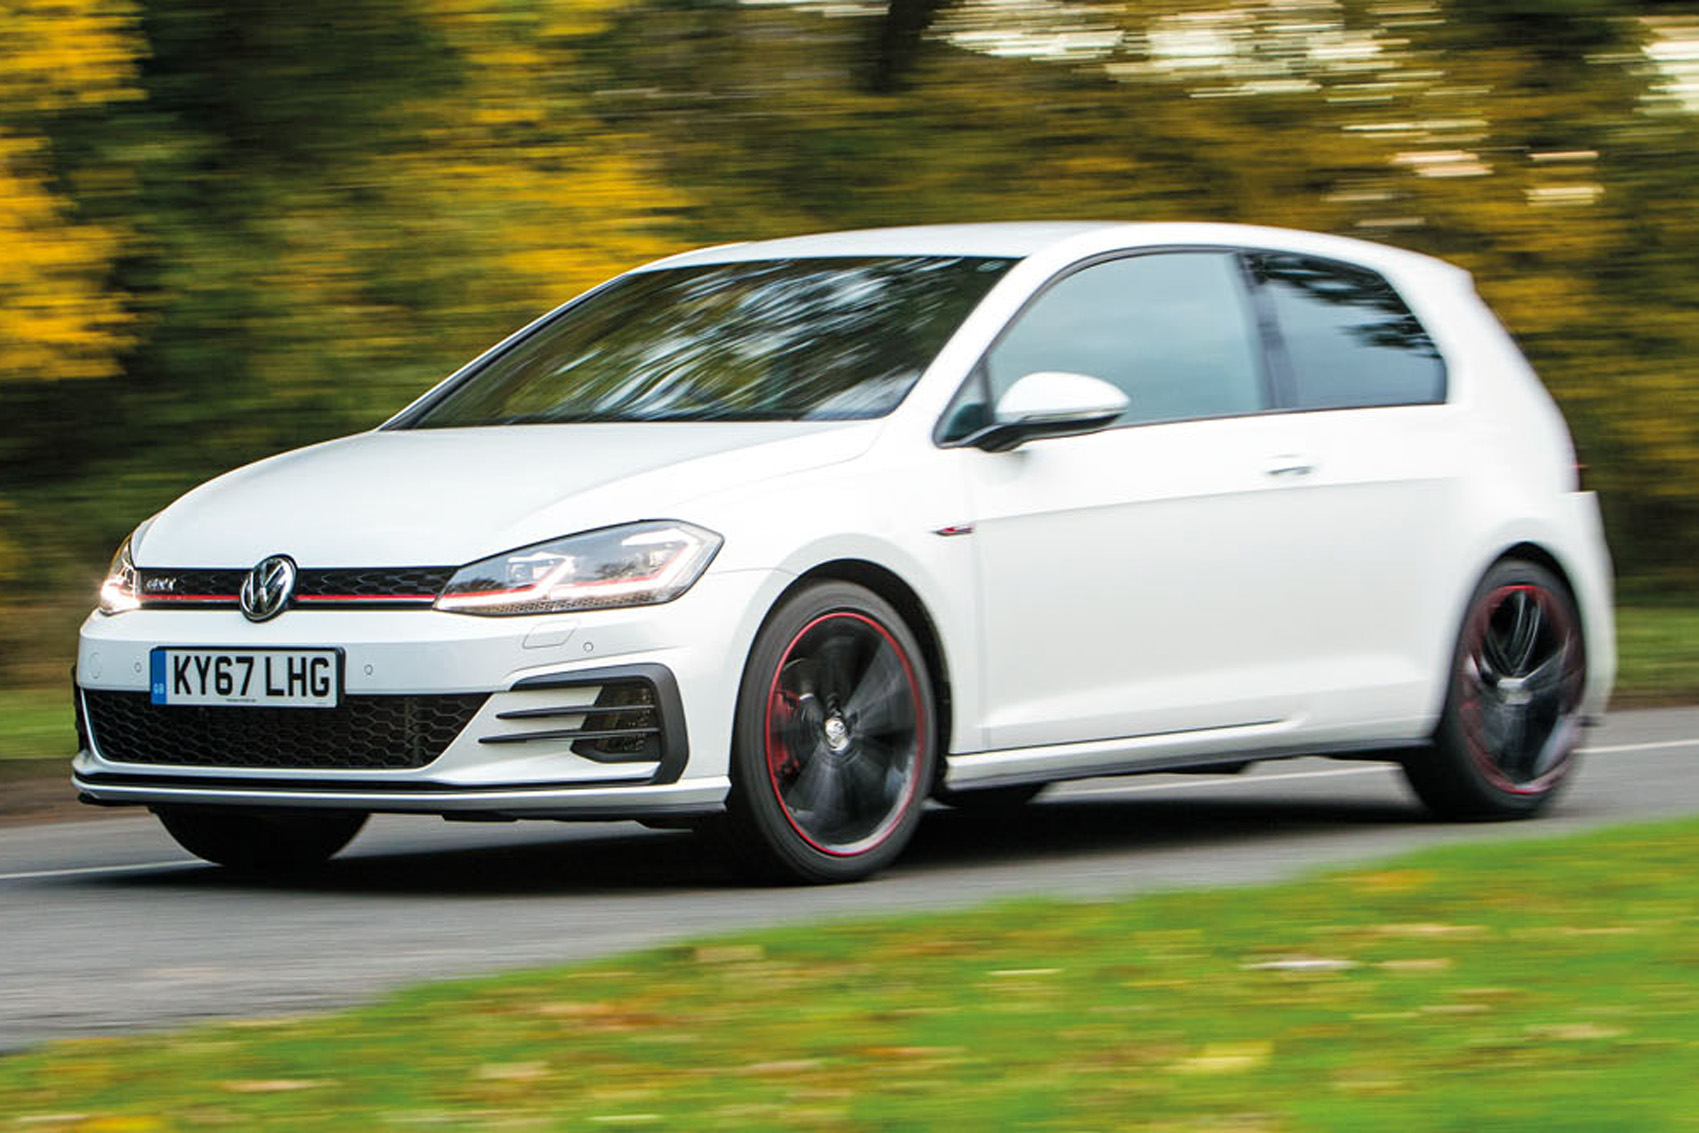 https://www.autocar.co.uk/sites/autocar.co.uk/files/images/car-reviews/first-drives/legacy/volkswagen-golf-gti.jpg